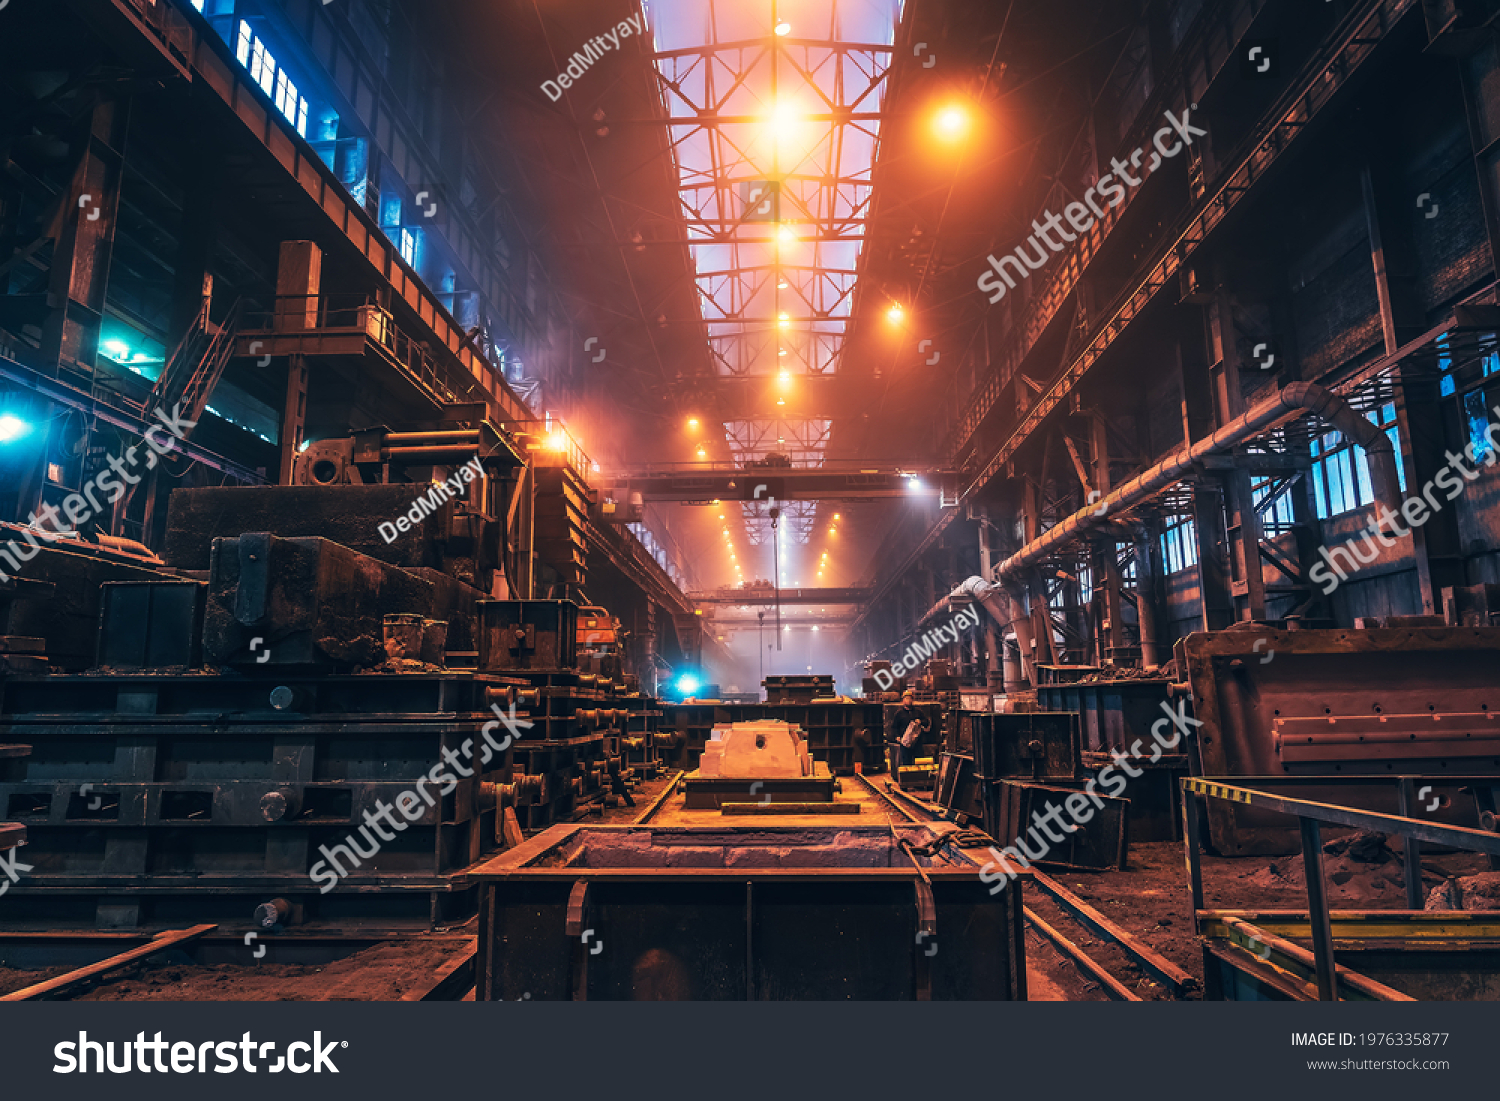 Metallurgical plant. Industrial steel production. Interior of metallurgical workshop inside. Steel mill factory. Heavy industry foundry #1976335877